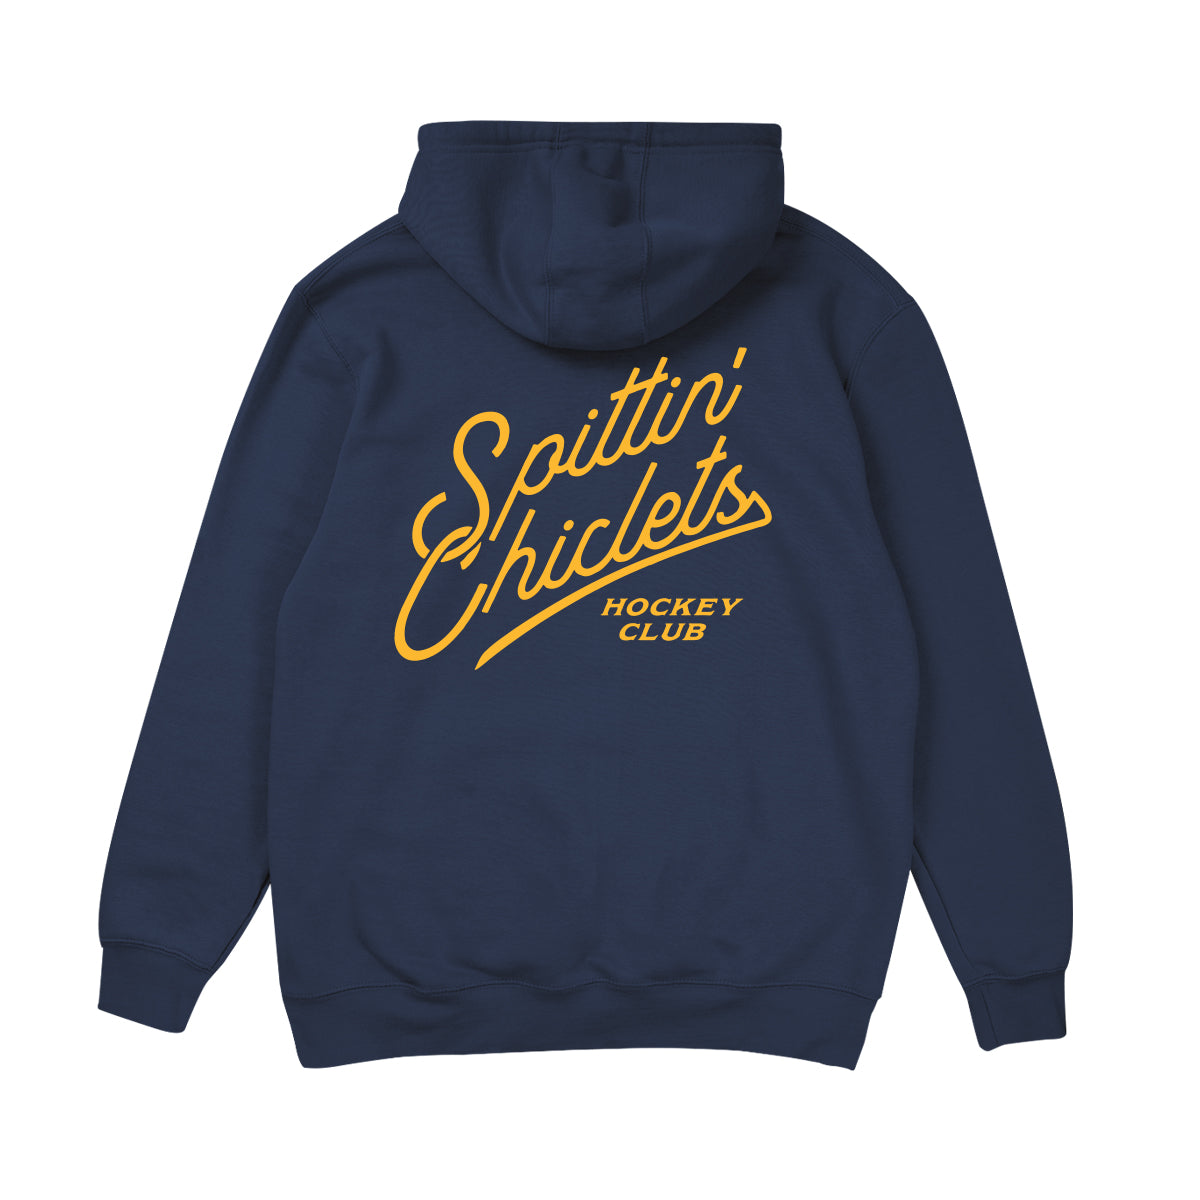 Spittin Chiclets Stacked Script Hoodie